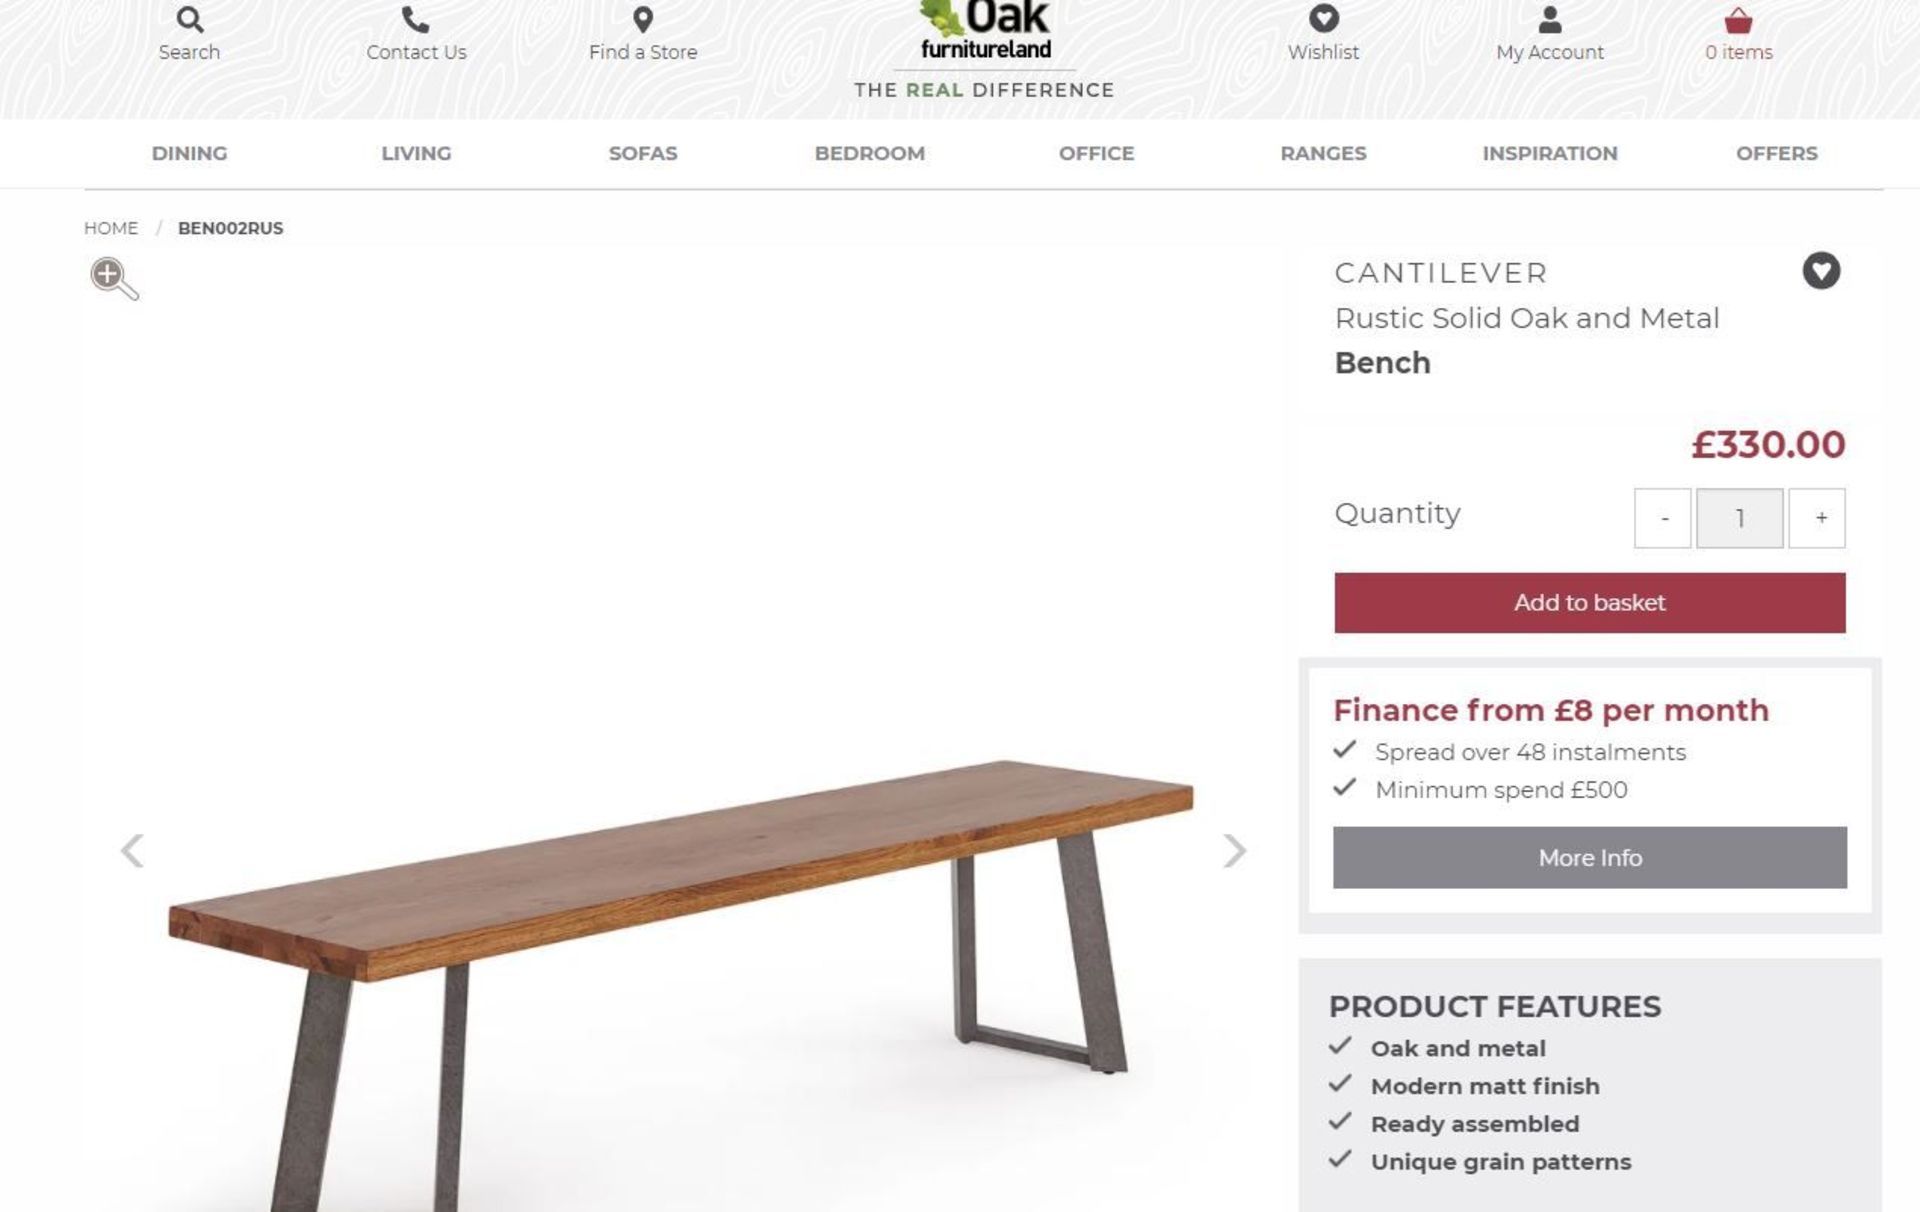 10 x New Boxed - Cantilever Rustic Solid Oak & Metal Bench. 180cm Long. RRP £330 EACH, TOTAL LOT RRP